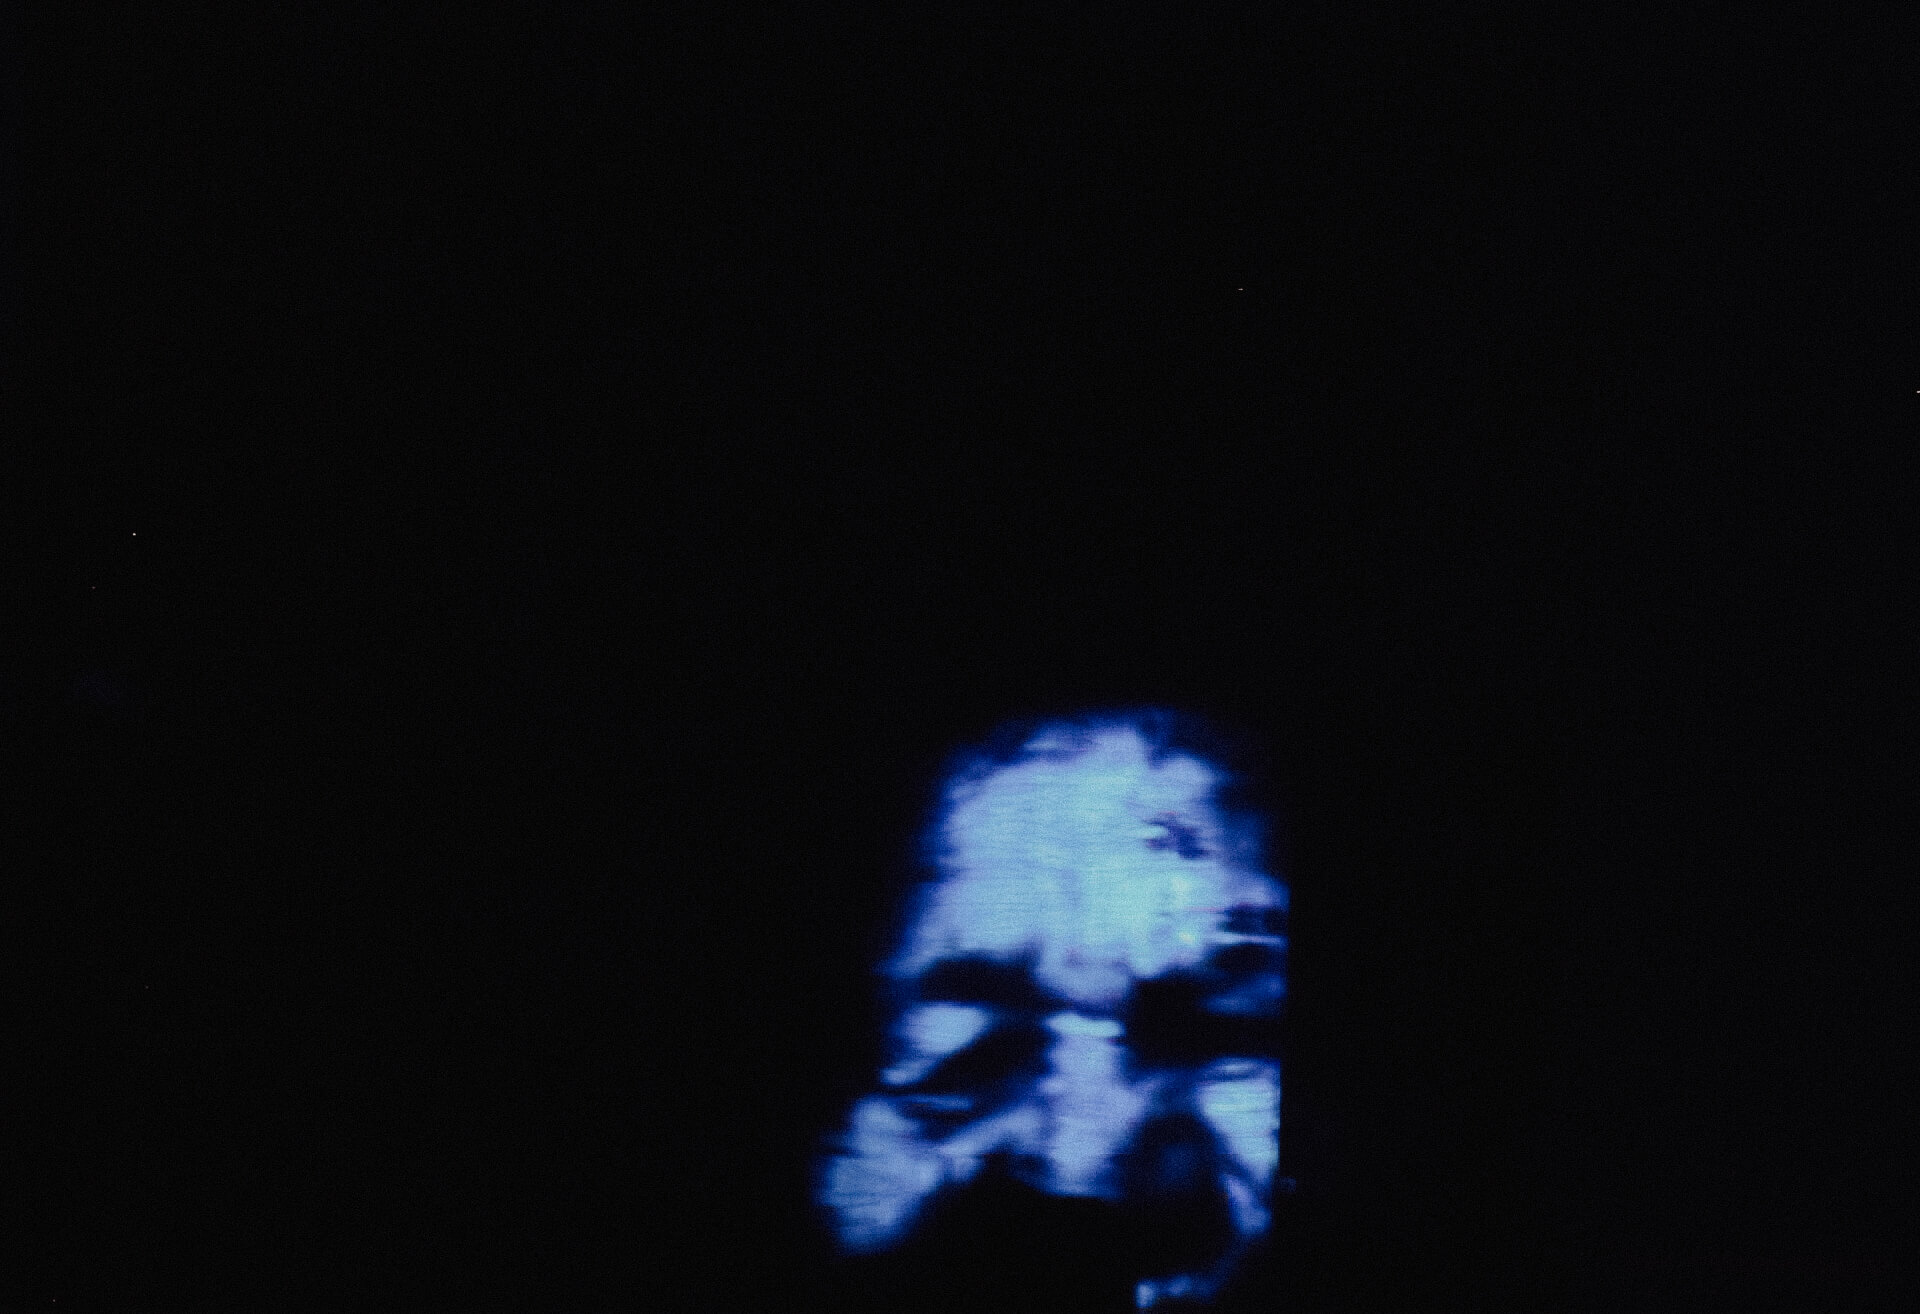 In a dark room a blue face of some one is projected on the wall.